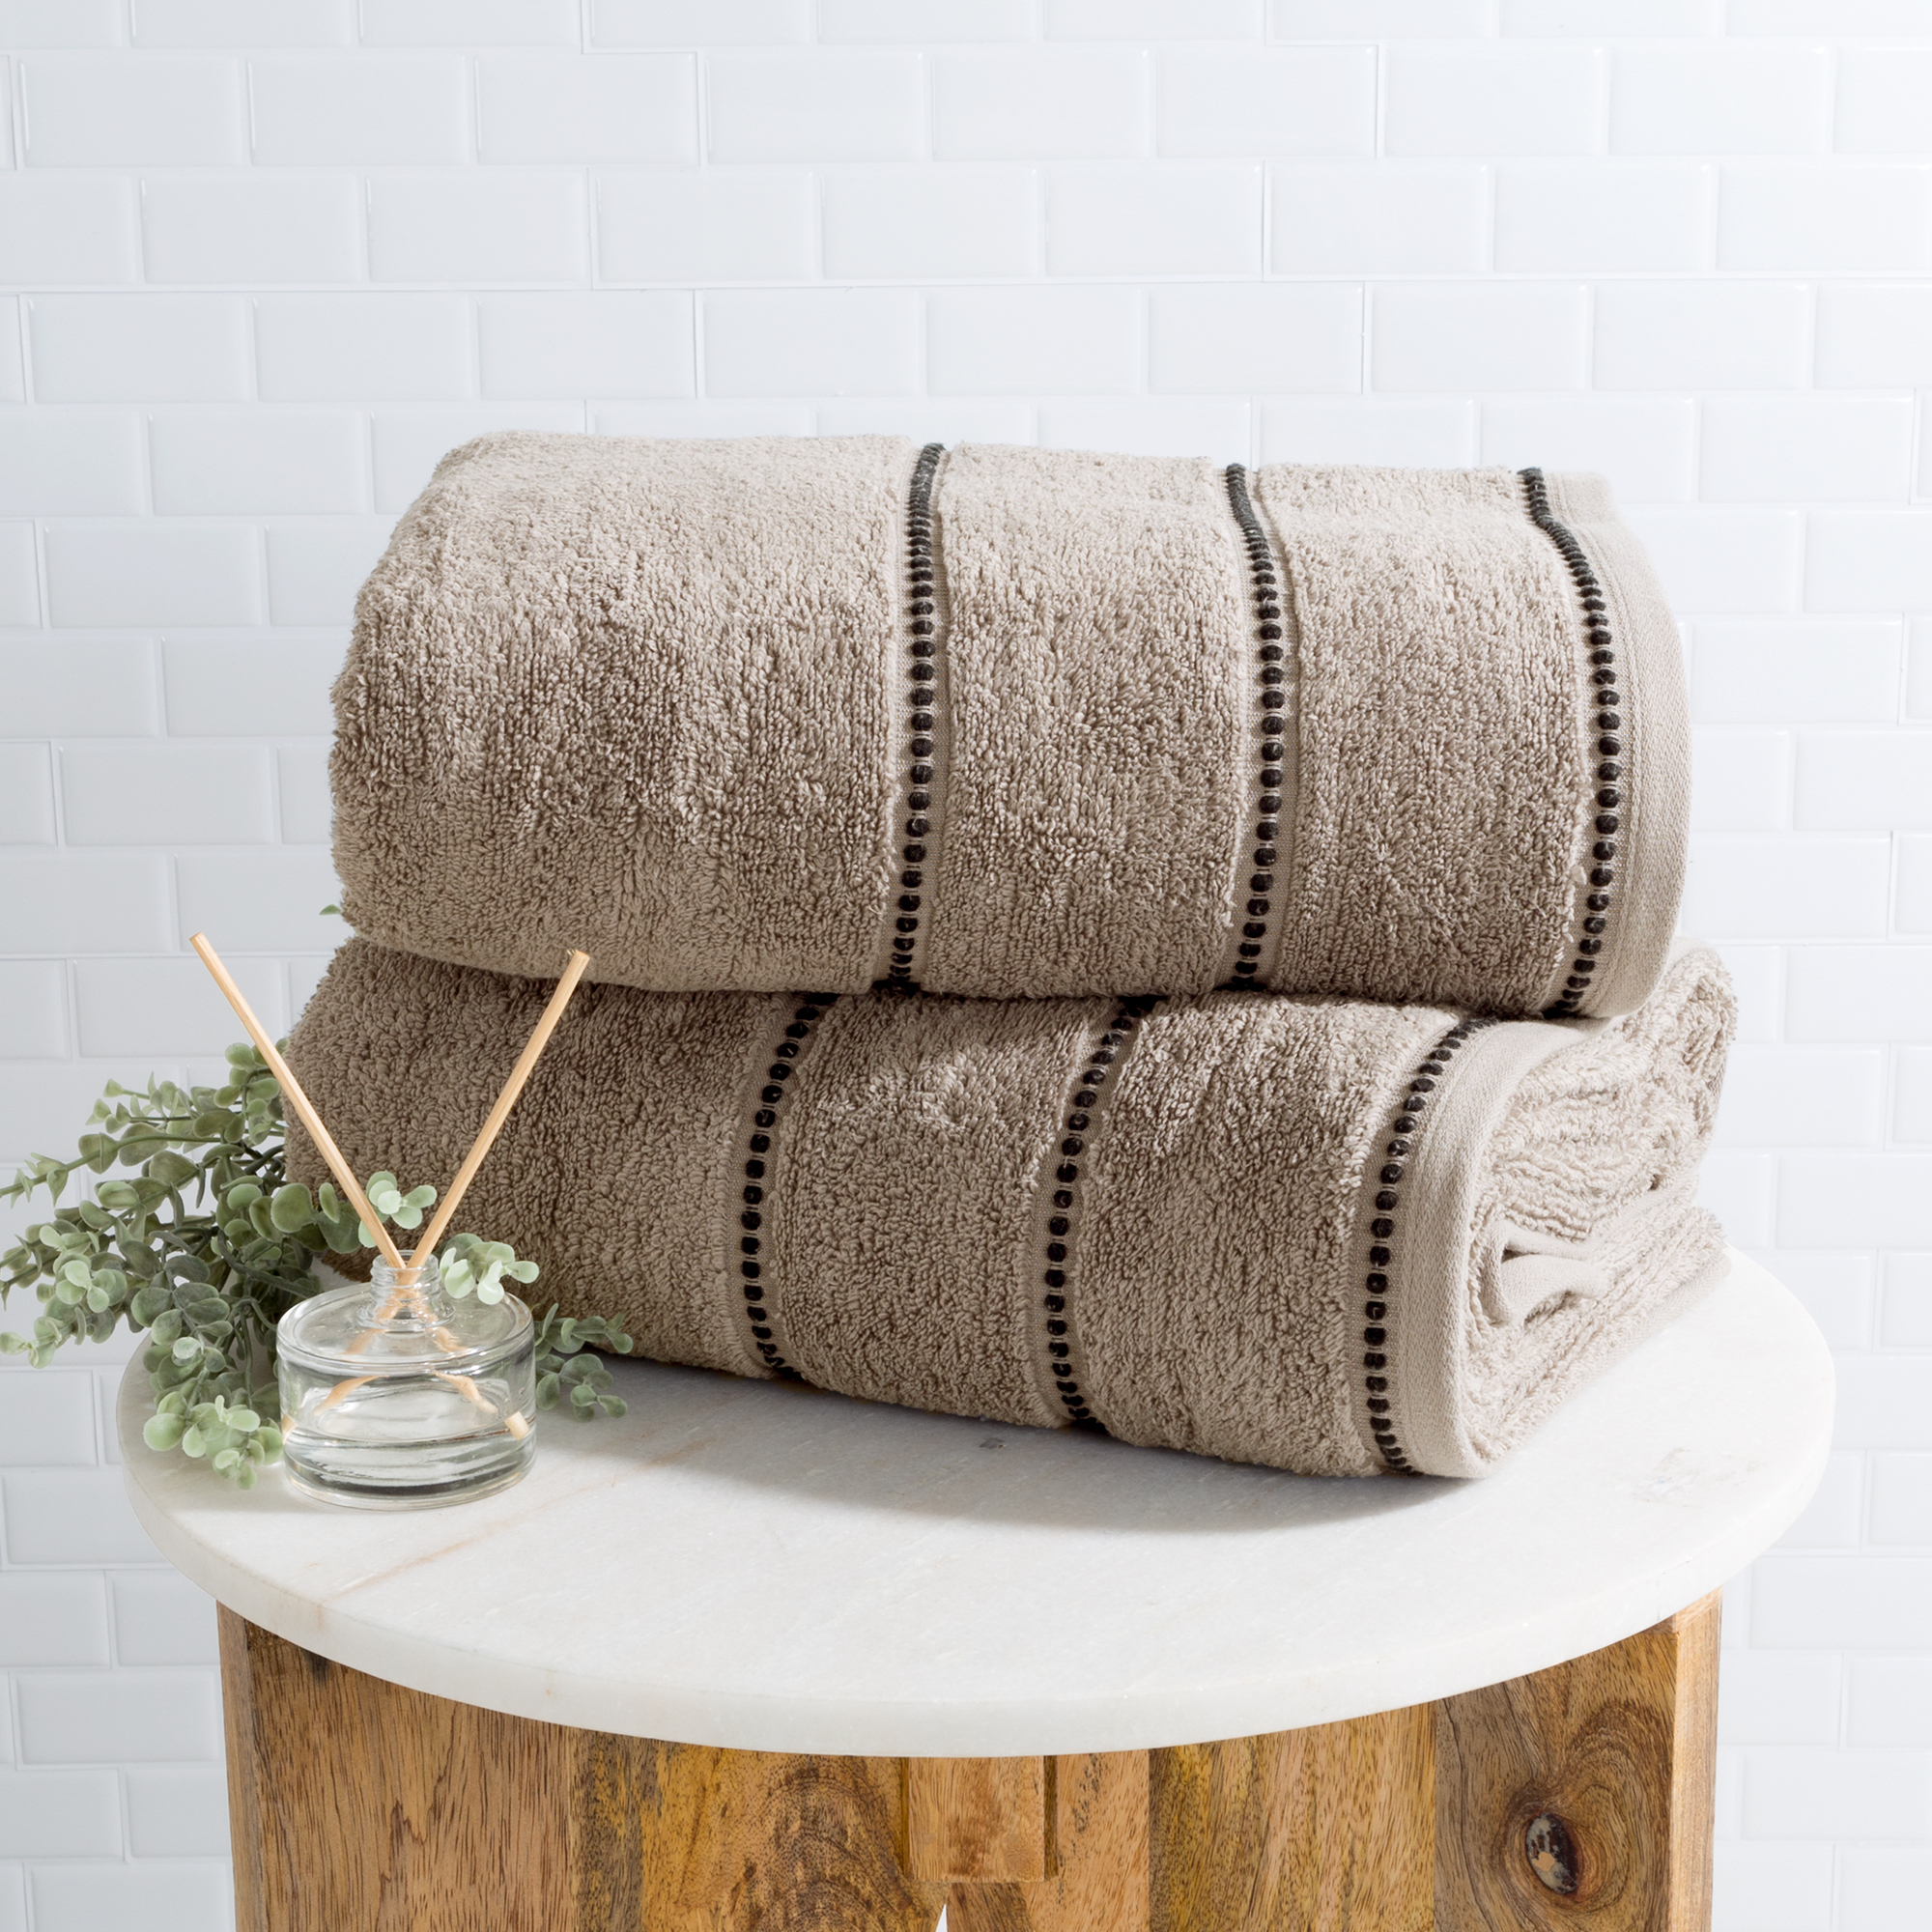 Luxurious Huge 34 X 68 In Cotton Towel Set- 2 Piece Bath Sheet Set Made From 100% Plush Cotton- Quick Dry, Soft And Absorbent Taupe